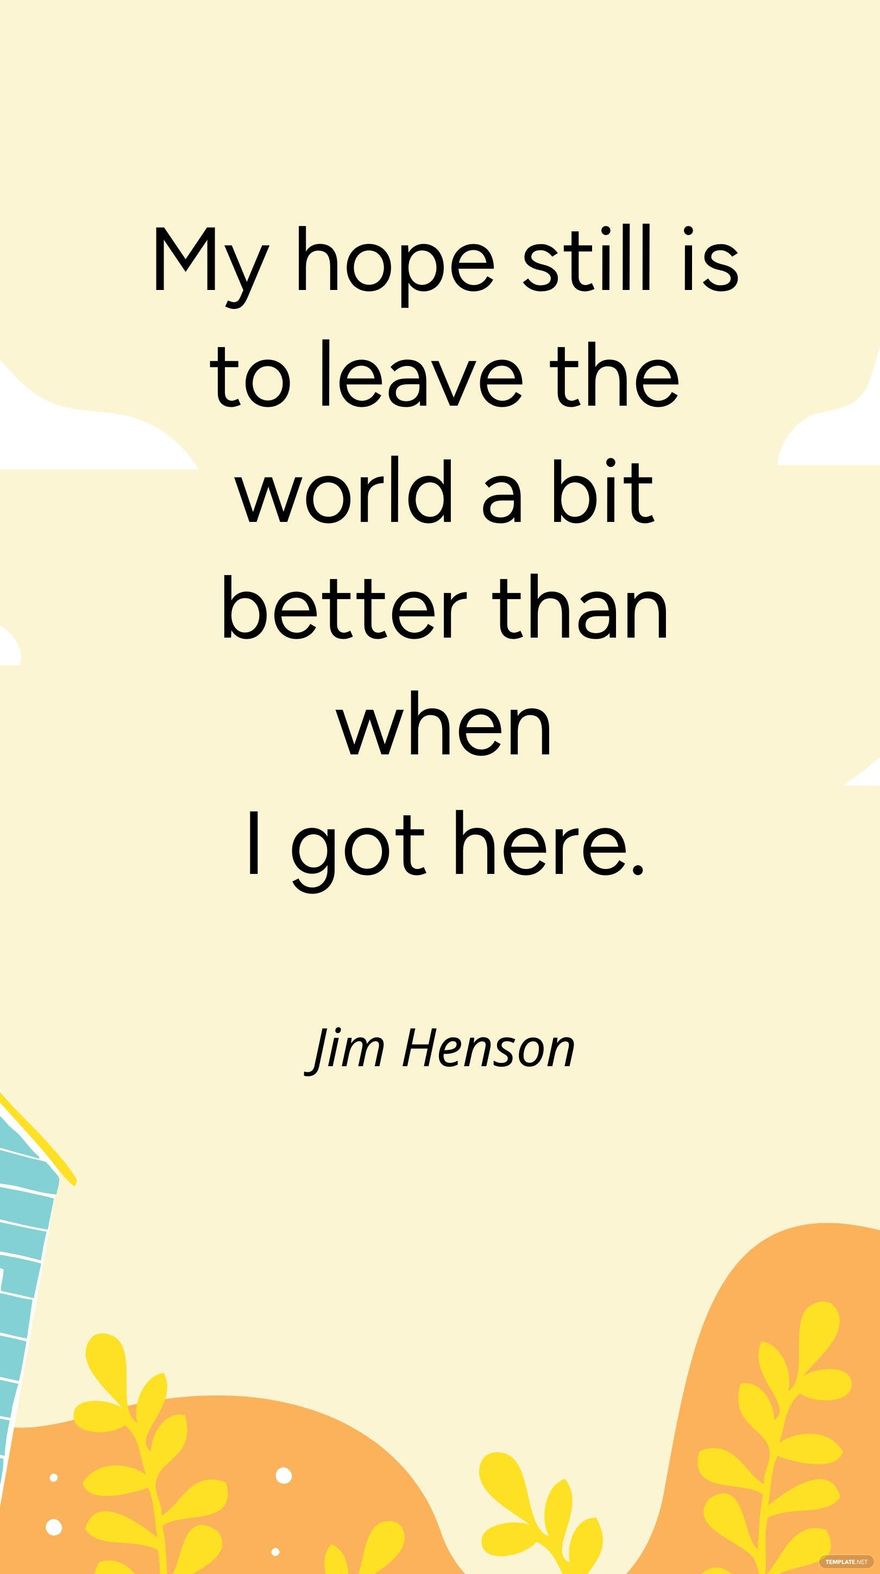 Free Jim Henson - My hope still is to leave the world a bit better than when I got here. in JPG